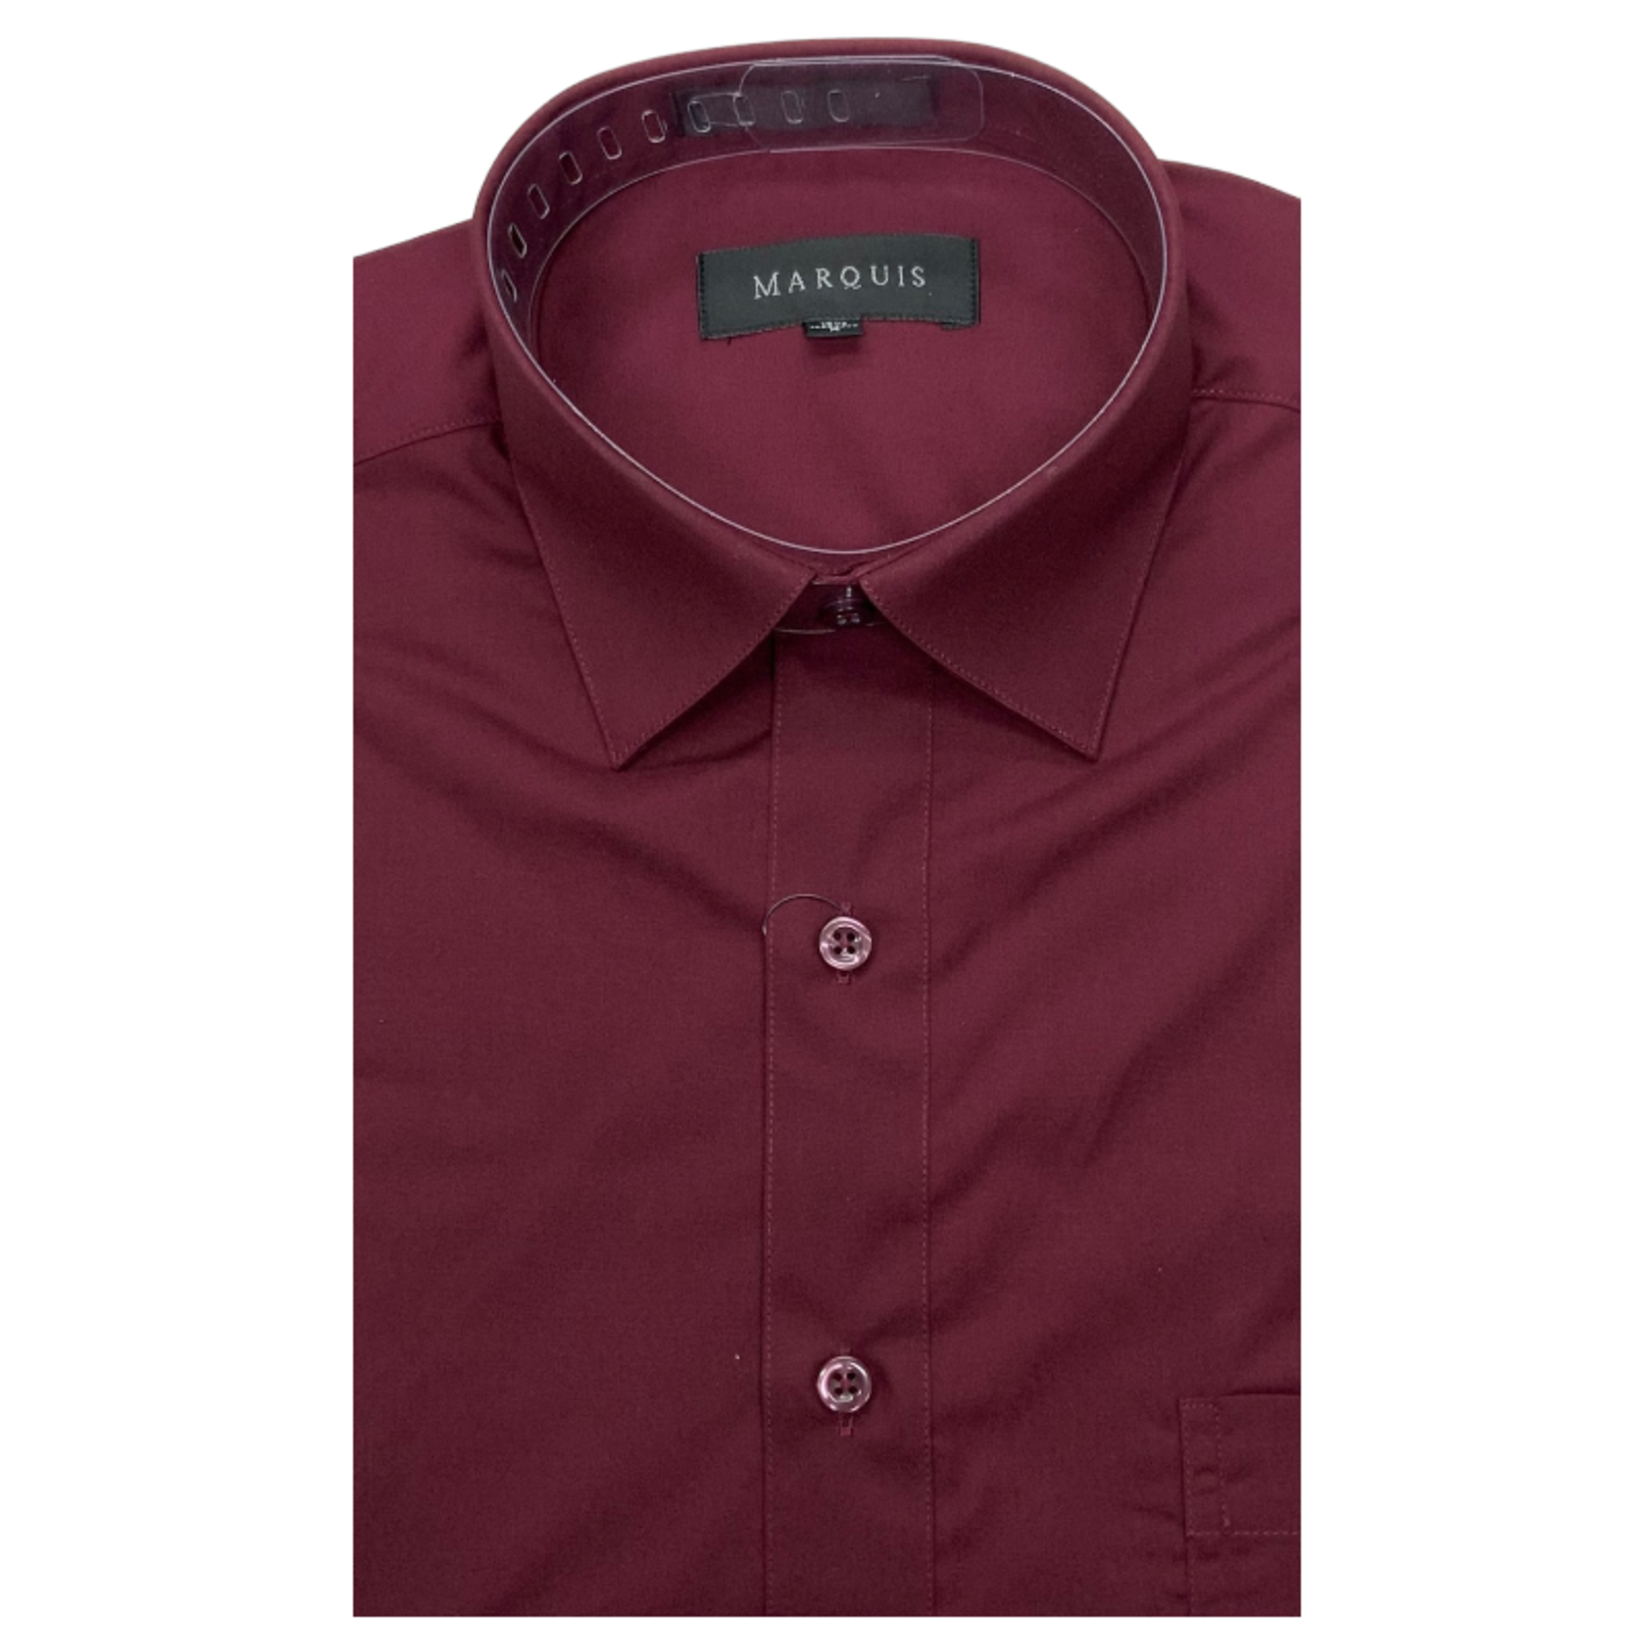 MARQUIS MARQUIS SOLID SHORT SLEEVE SHIRT 001